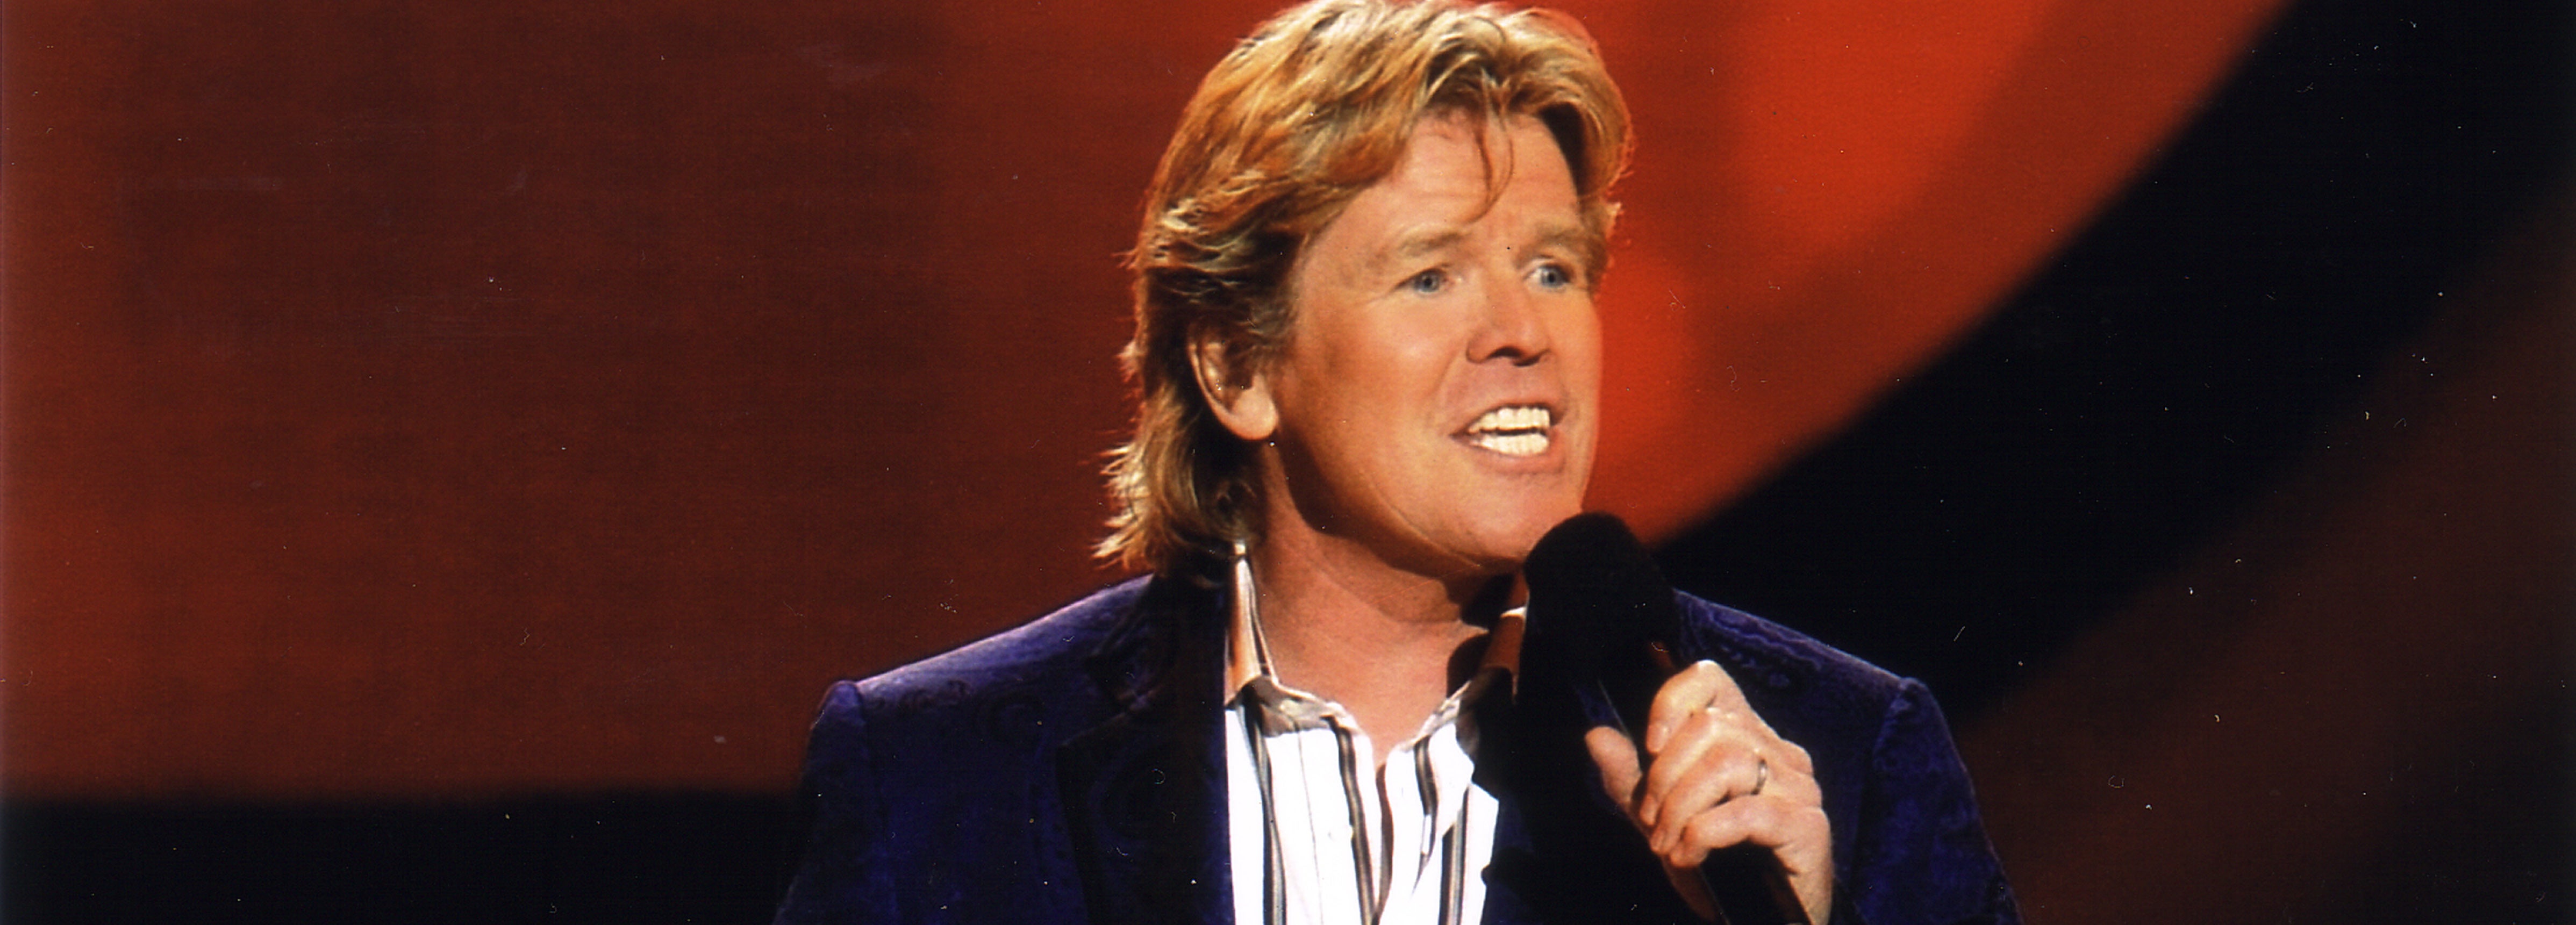 An Olde English Christmas with Herman's Hermits starring Peter Noone ...